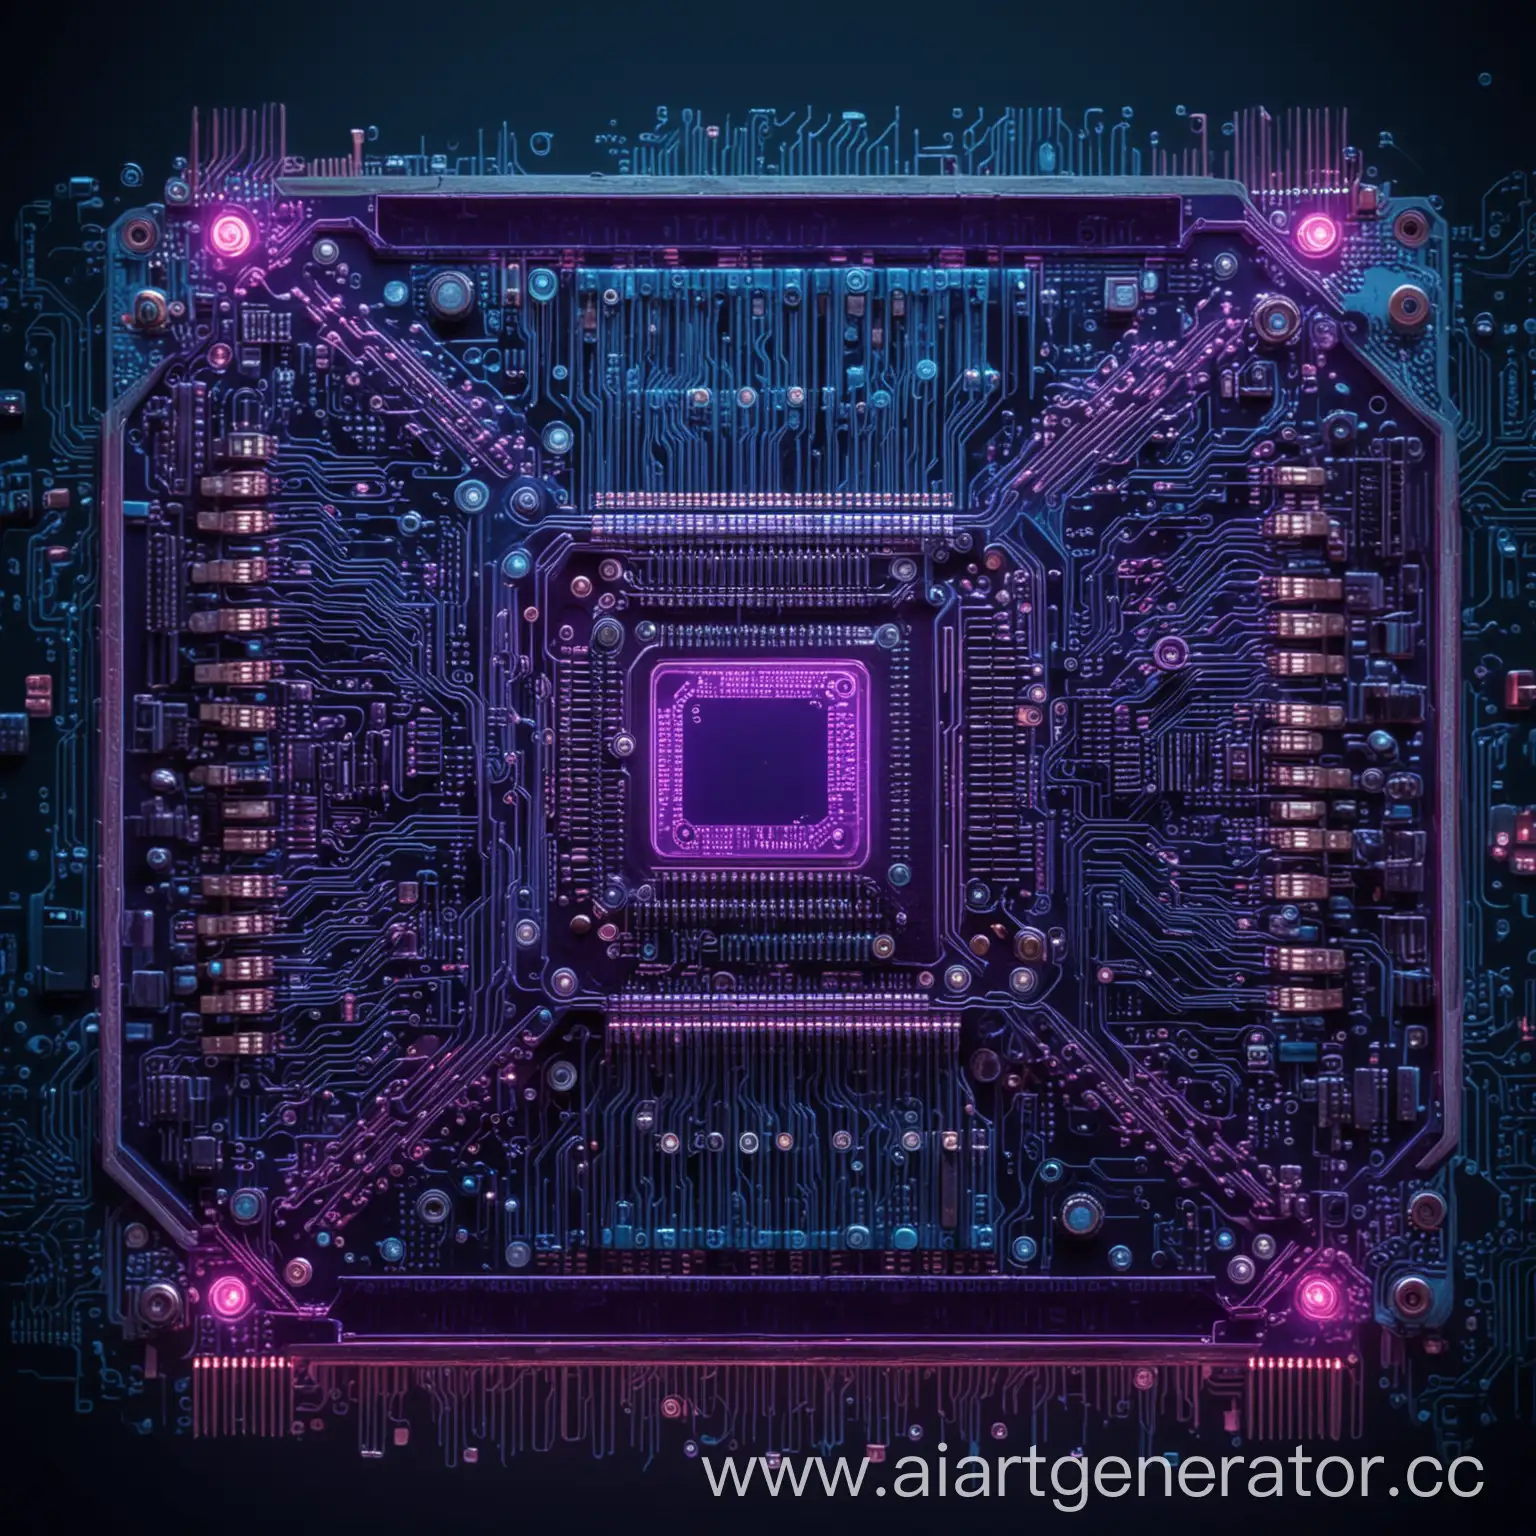 Neon-Style-Printed-Circuit-Board-with-Pulsating-Microchips